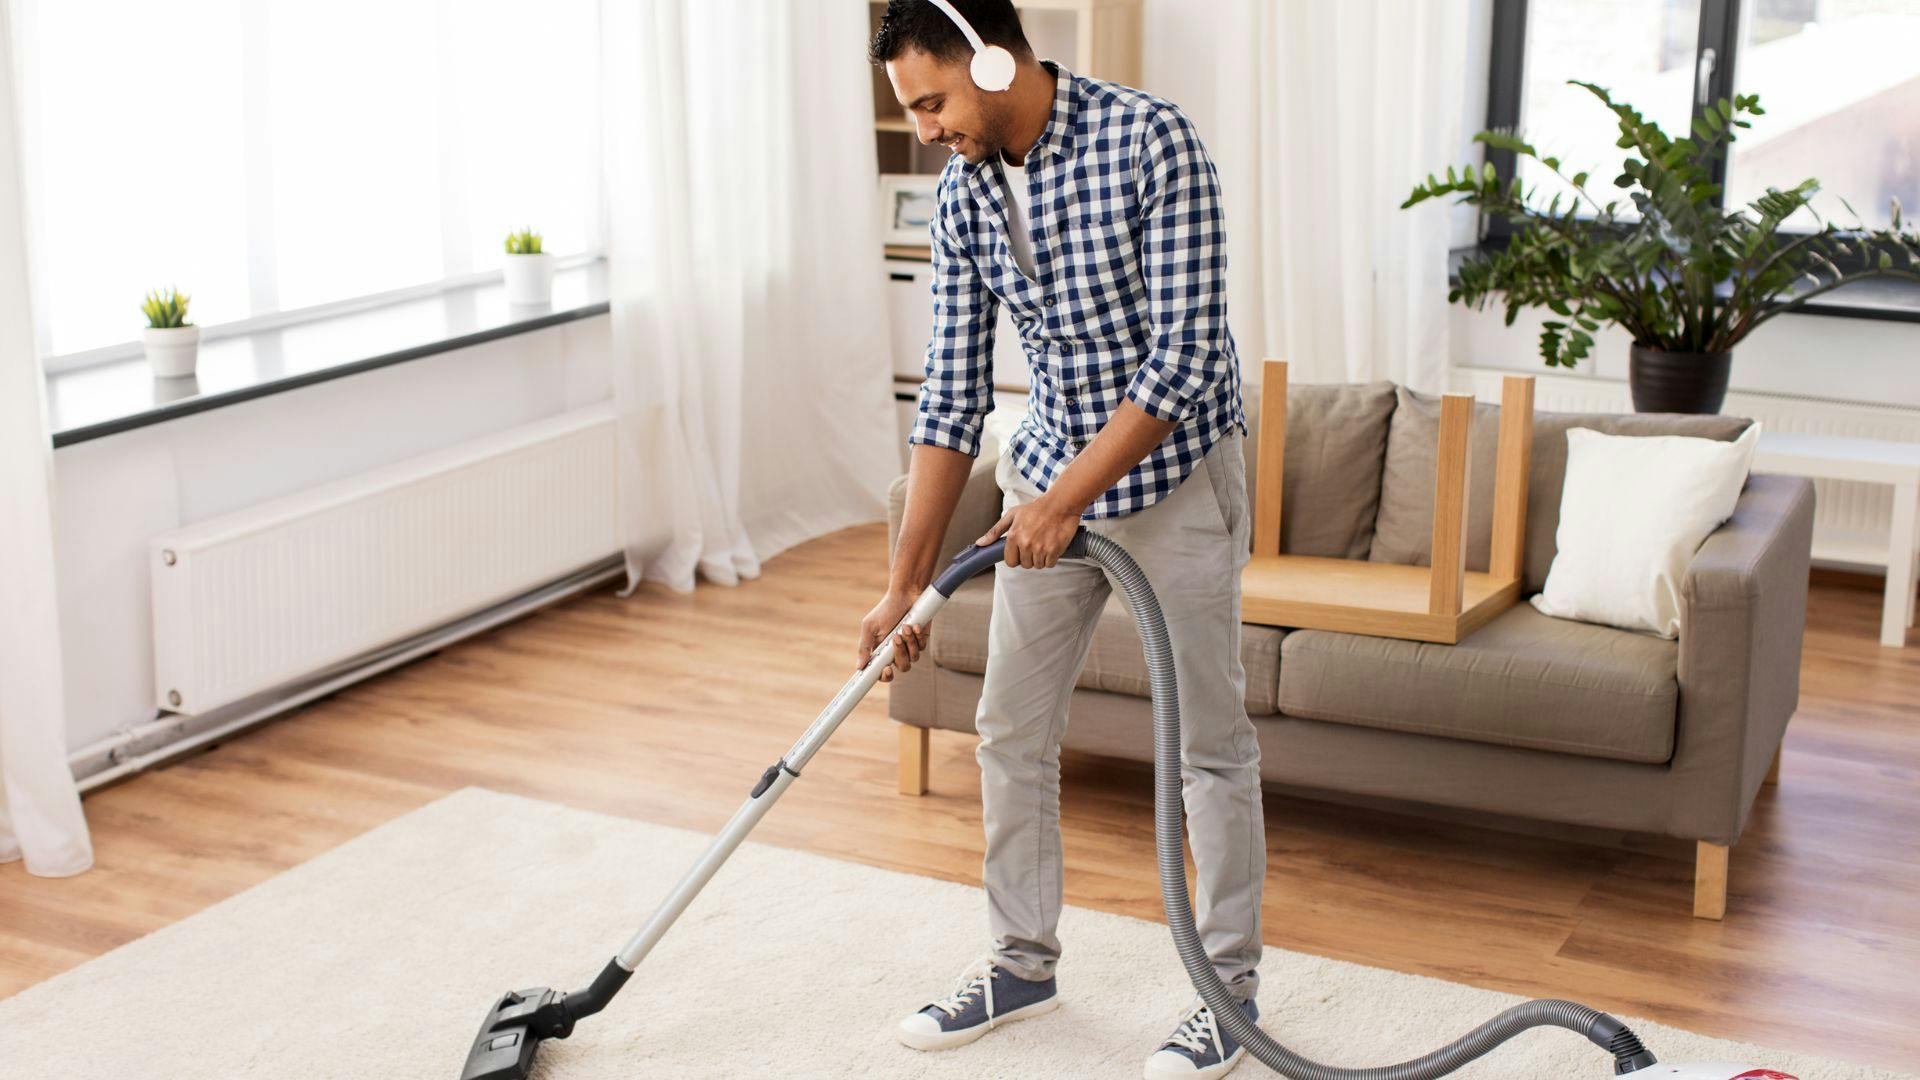 7 Benefits of Hiring Professionals to Clean Your Home